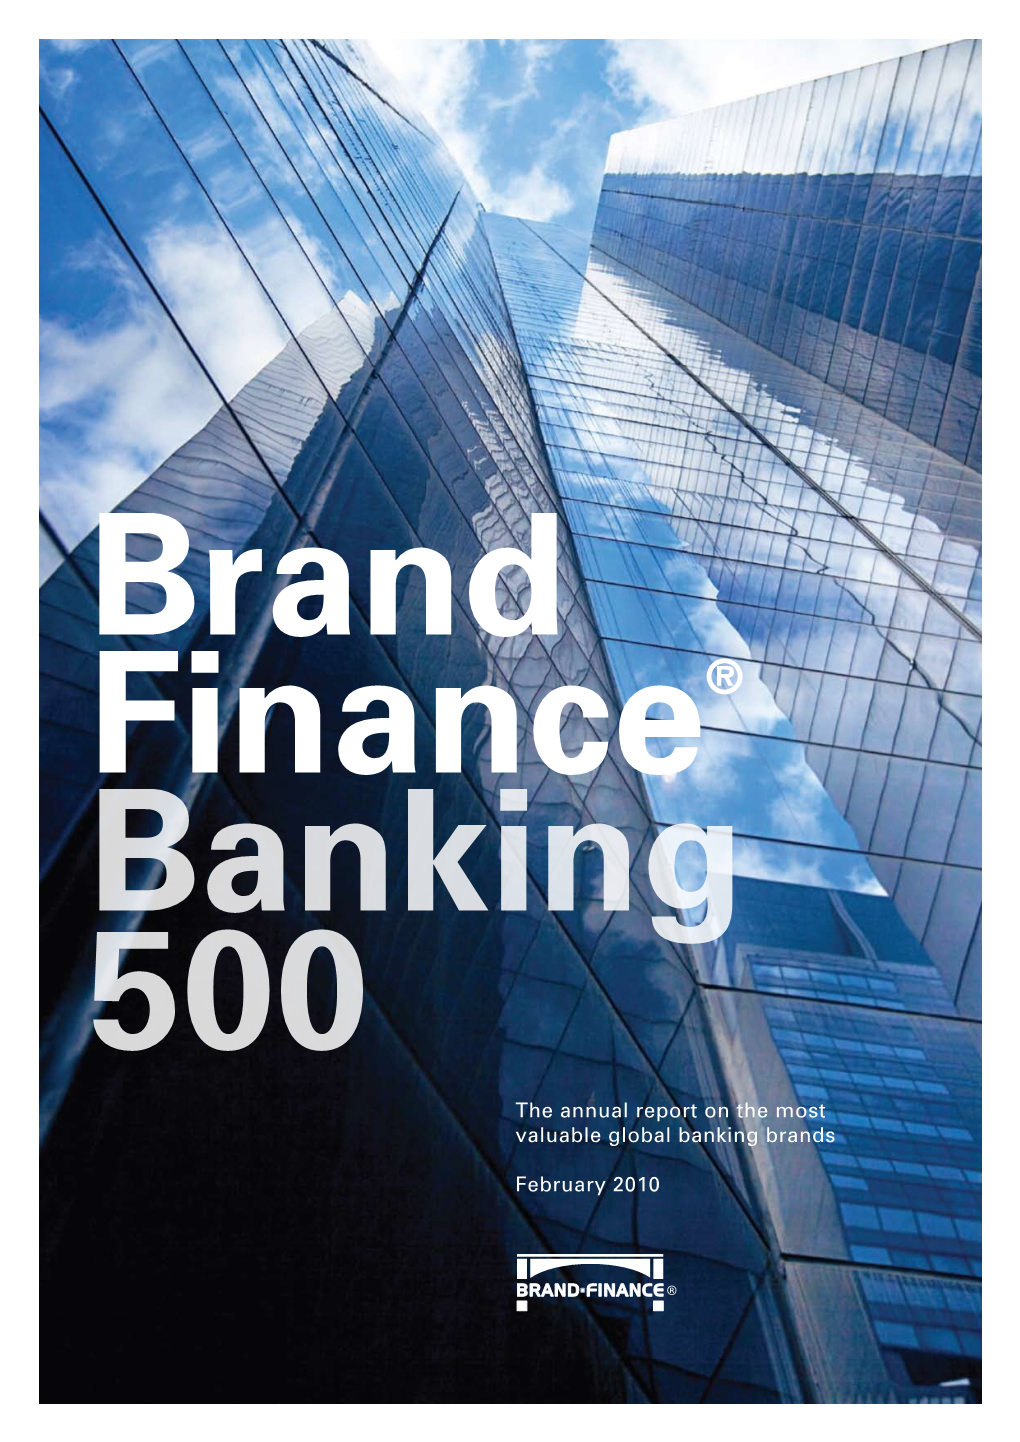 The Annual Report on the Most Valuable Global Banking Brands